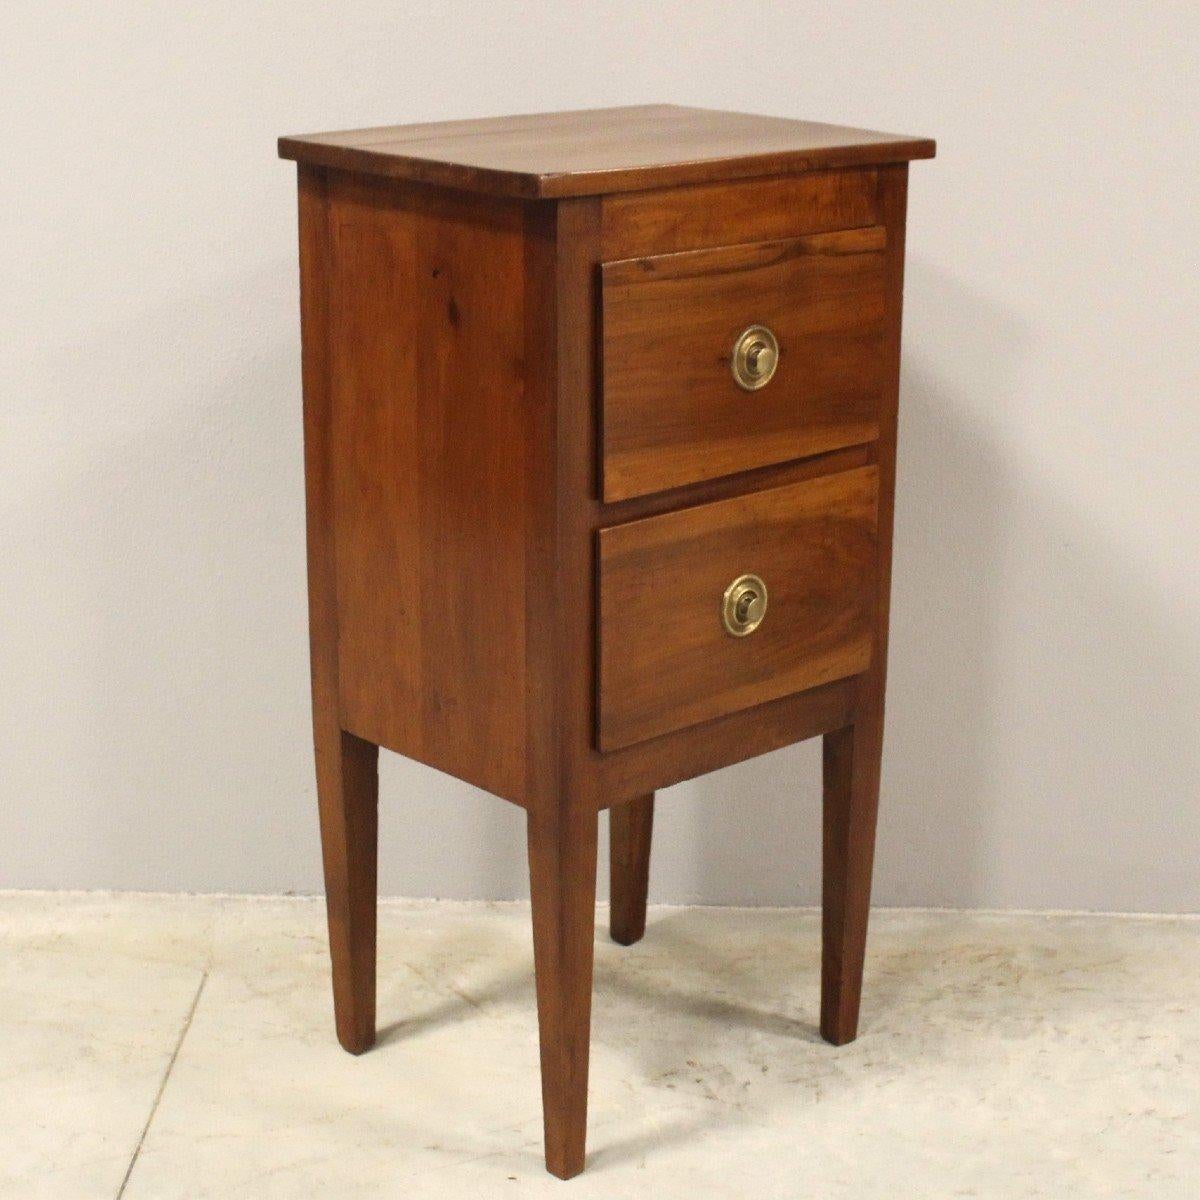 18th Century Italian Walnut Bedside Table with Two Drawers and Tapered Legs 3